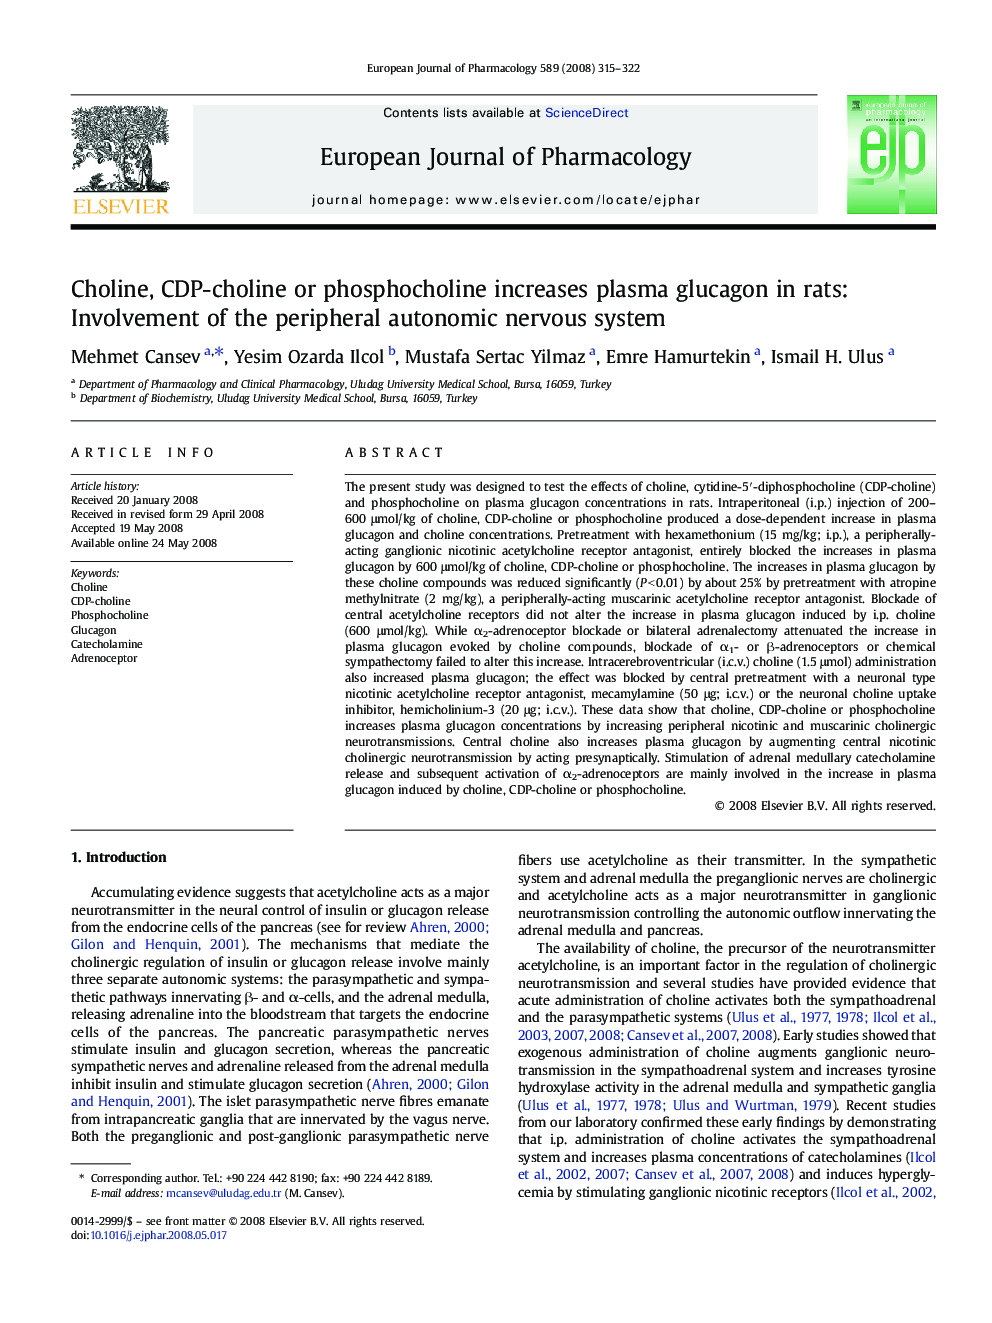 Choline, CDP-choline or phosphocholine increases plasma glucagon in rats: Involvement of the peripheral autonomic nervous system